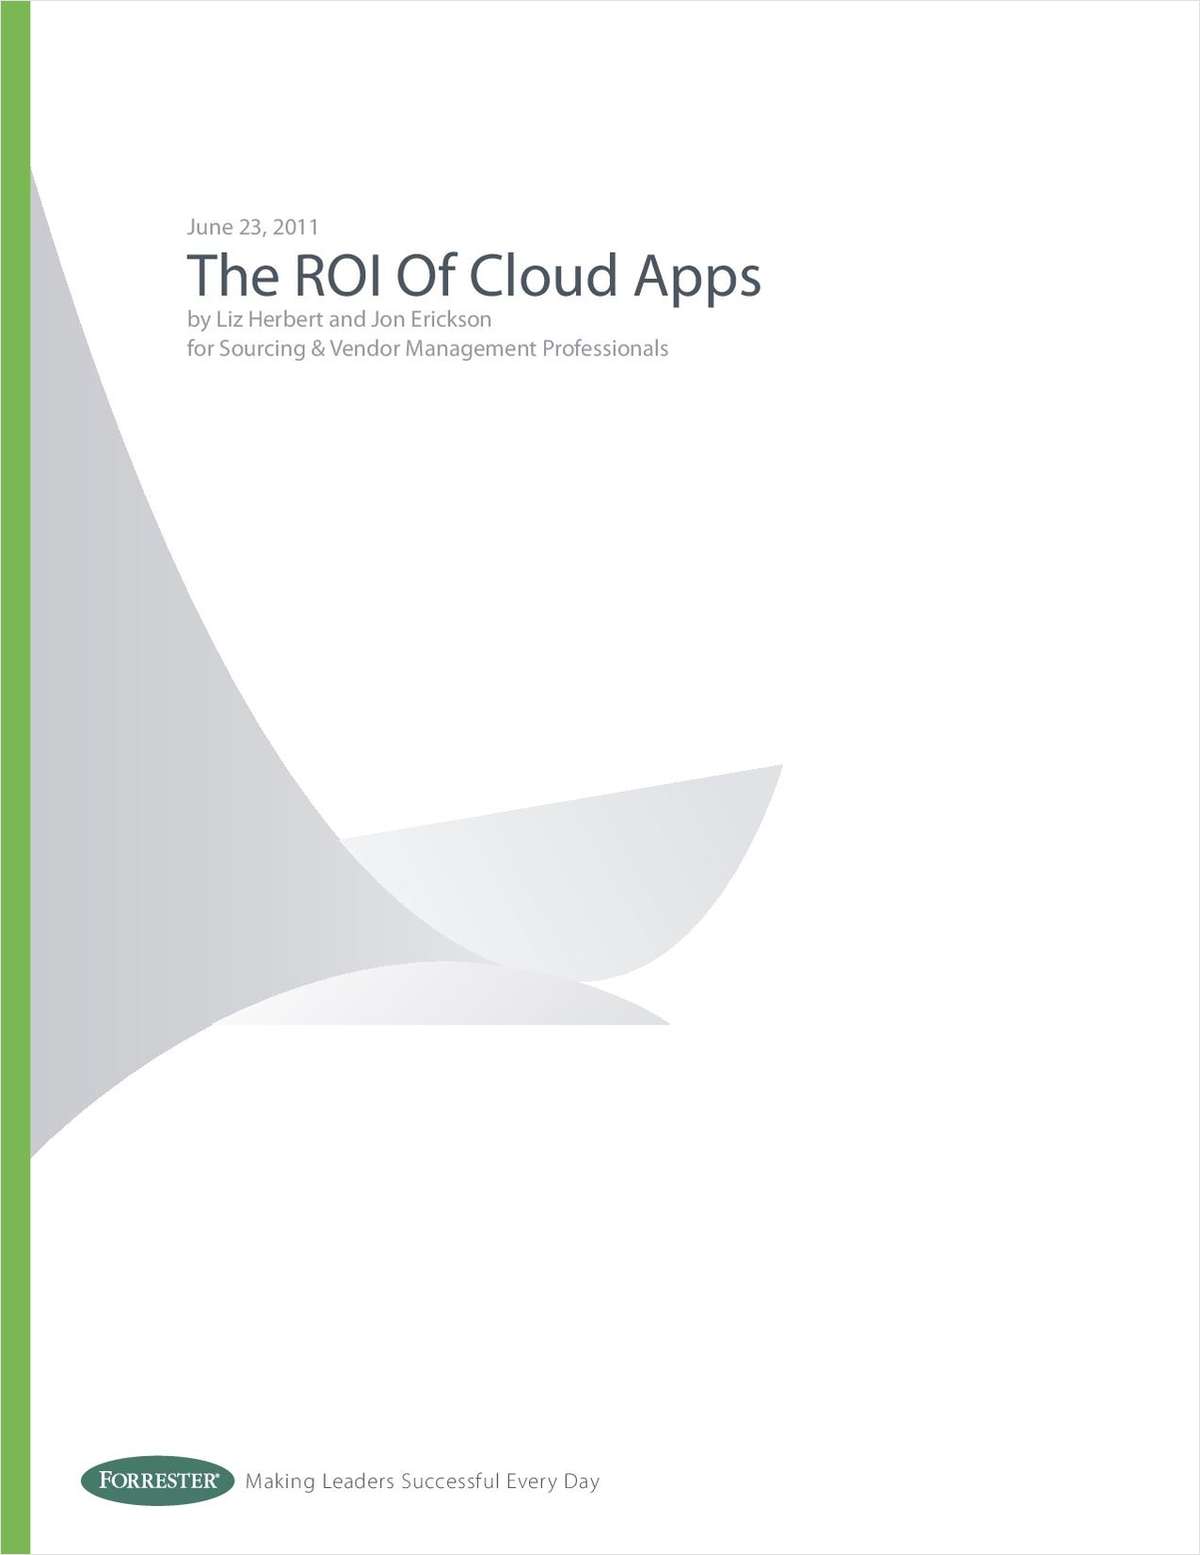 The ROI of Cloud Apps